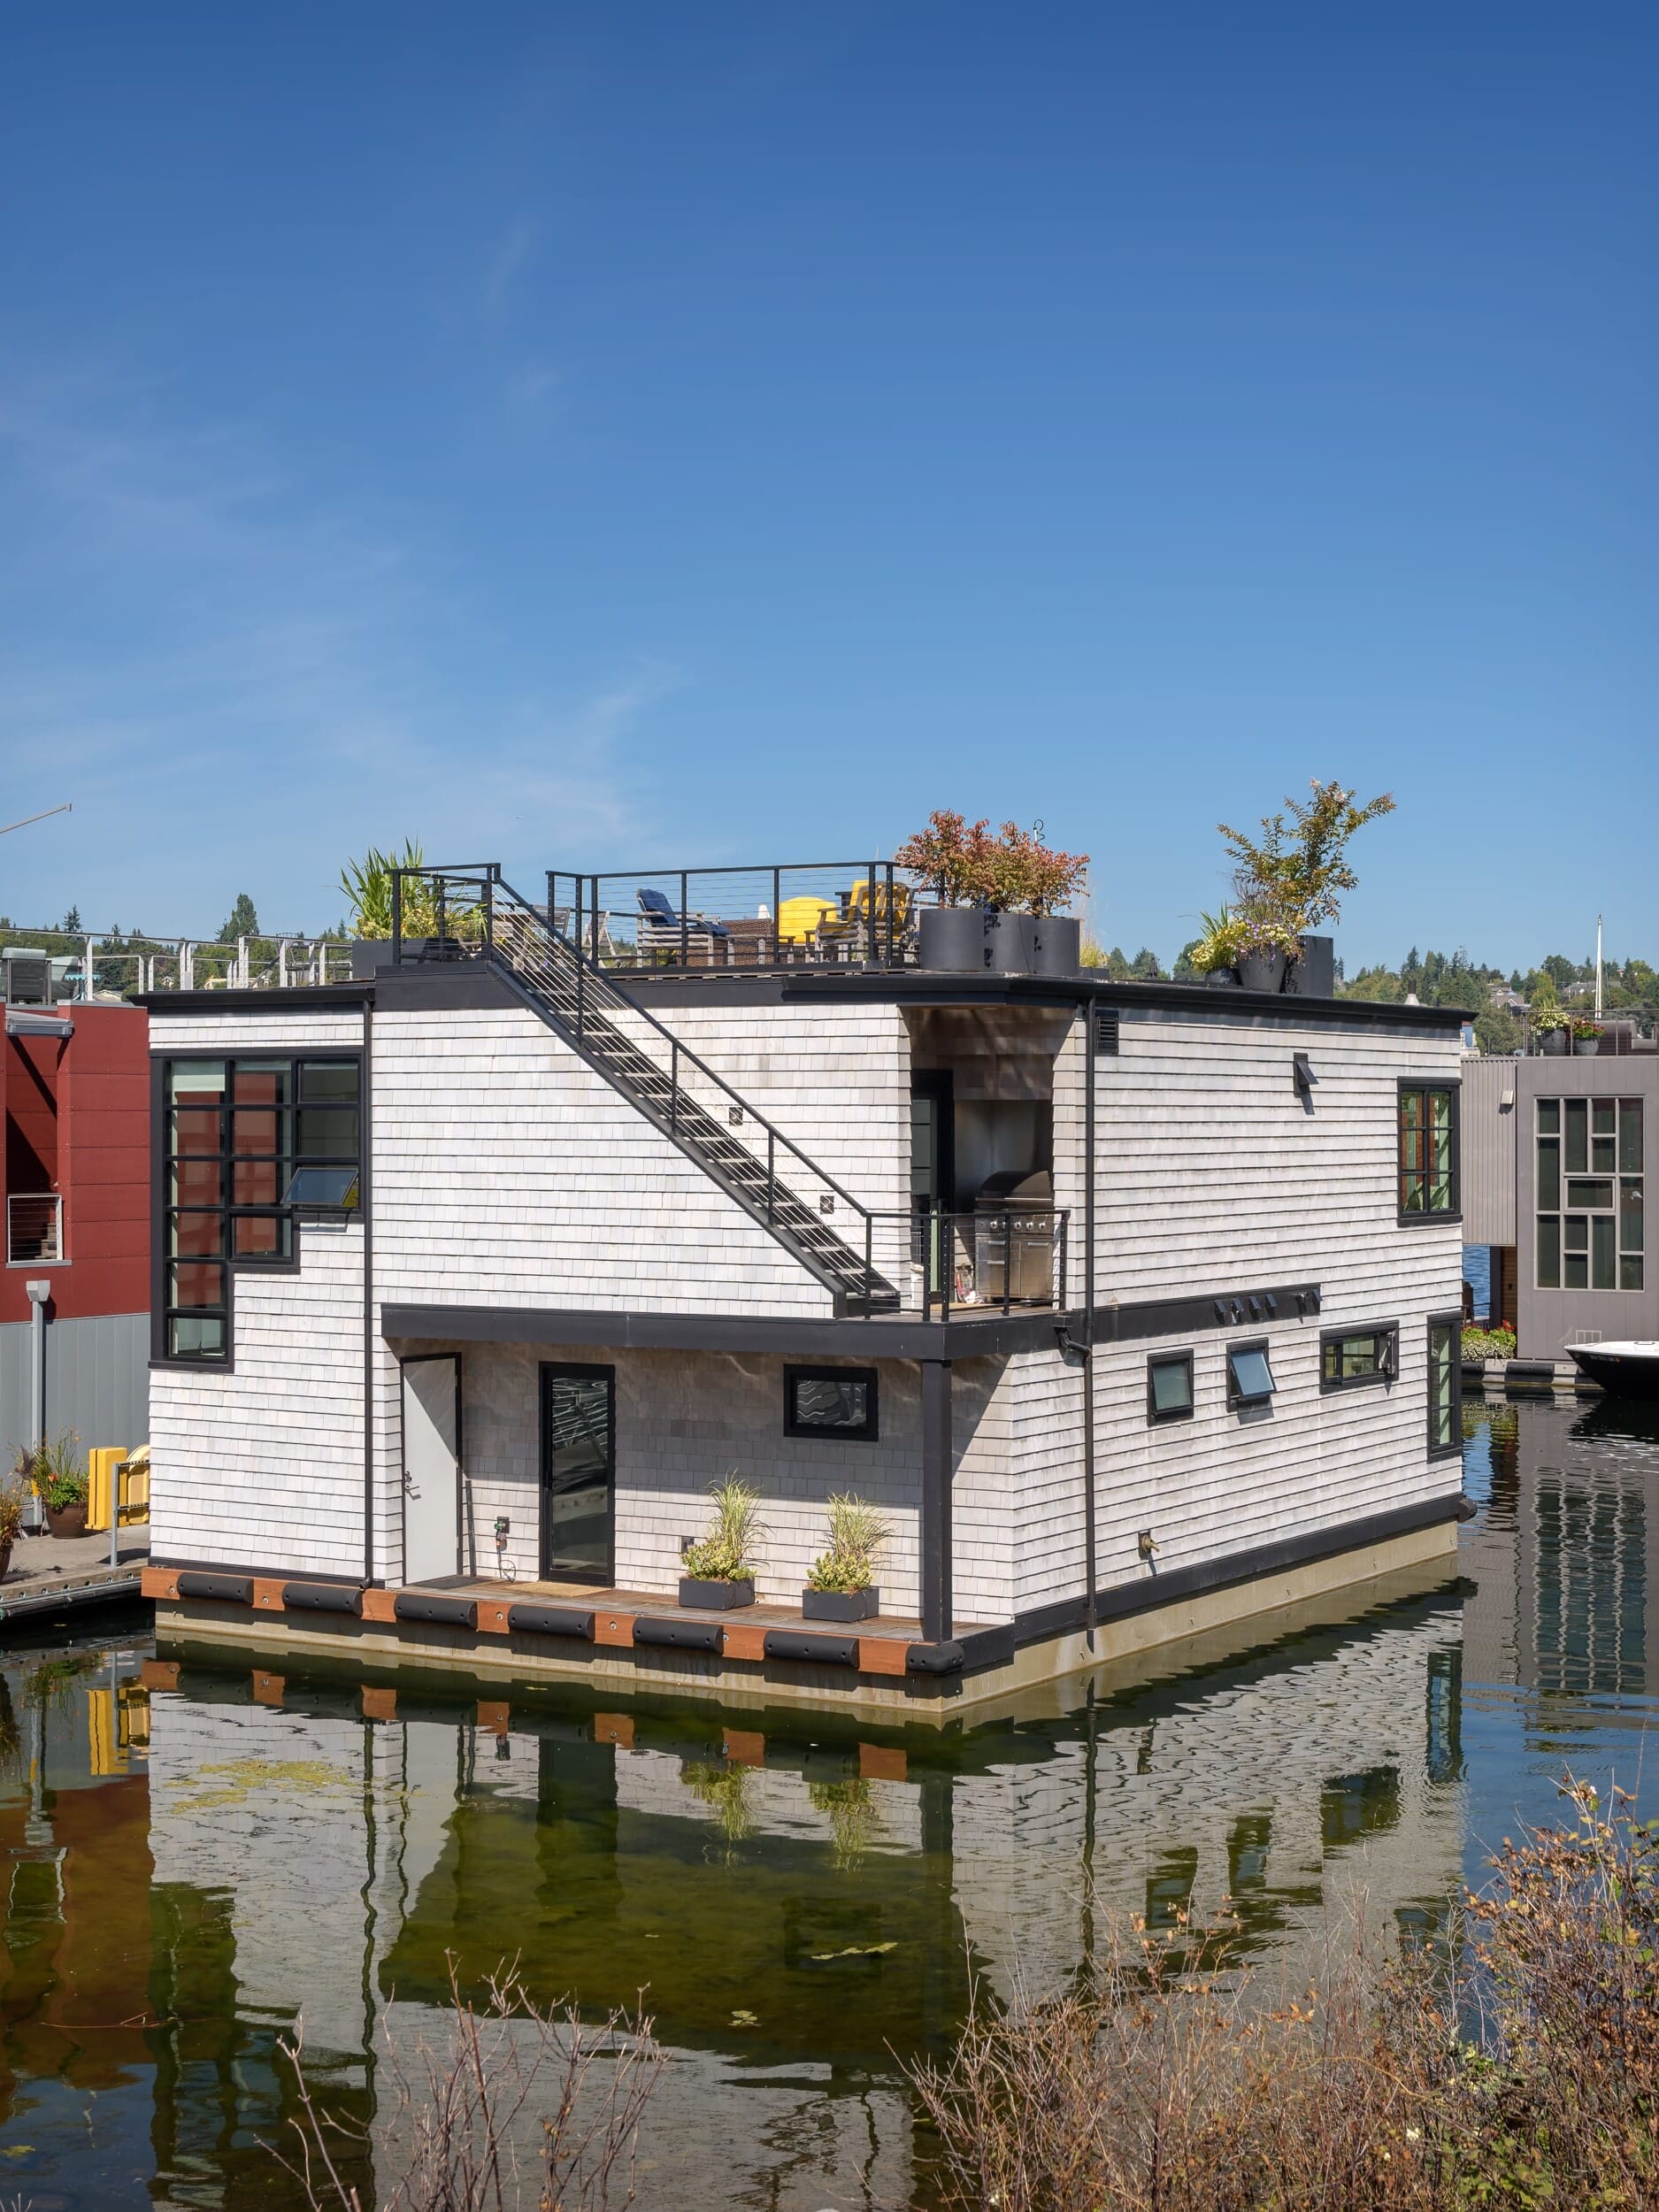 A houseboat is floating in a body of water.